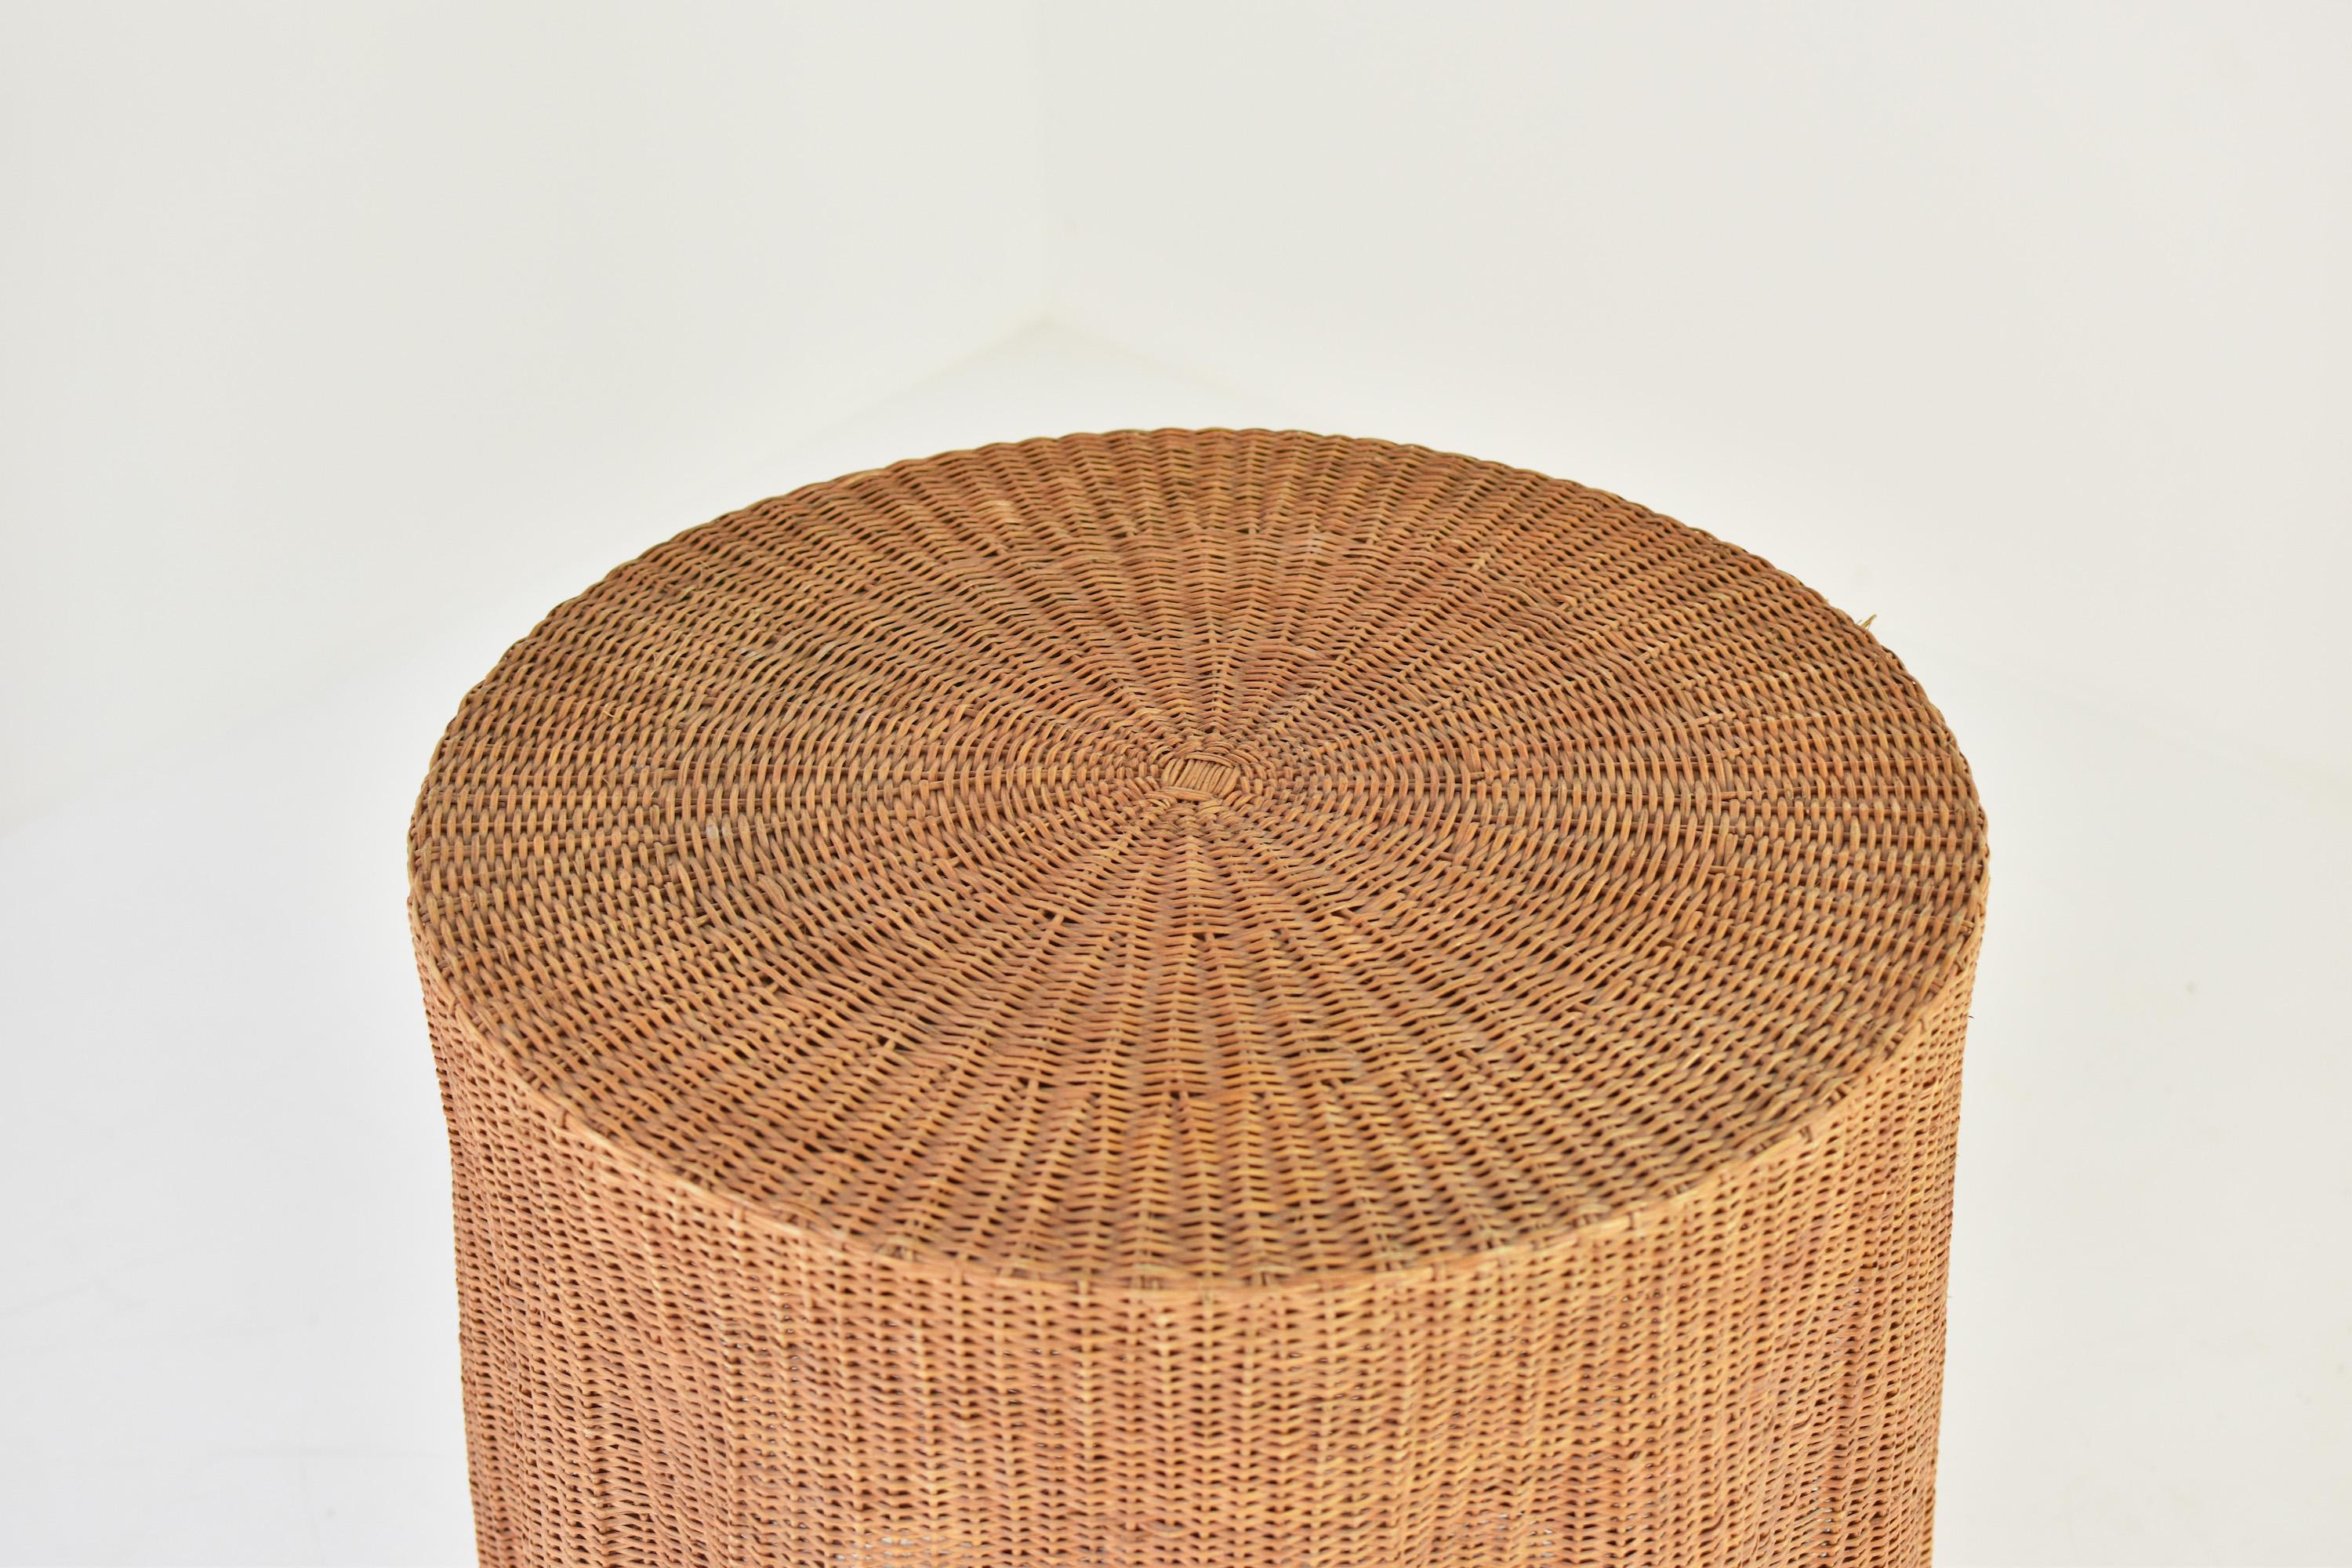 Late 20th Century Trompe L’oeil Wicker Side Table with ‘Draped’ Illusion from France, 1970’s